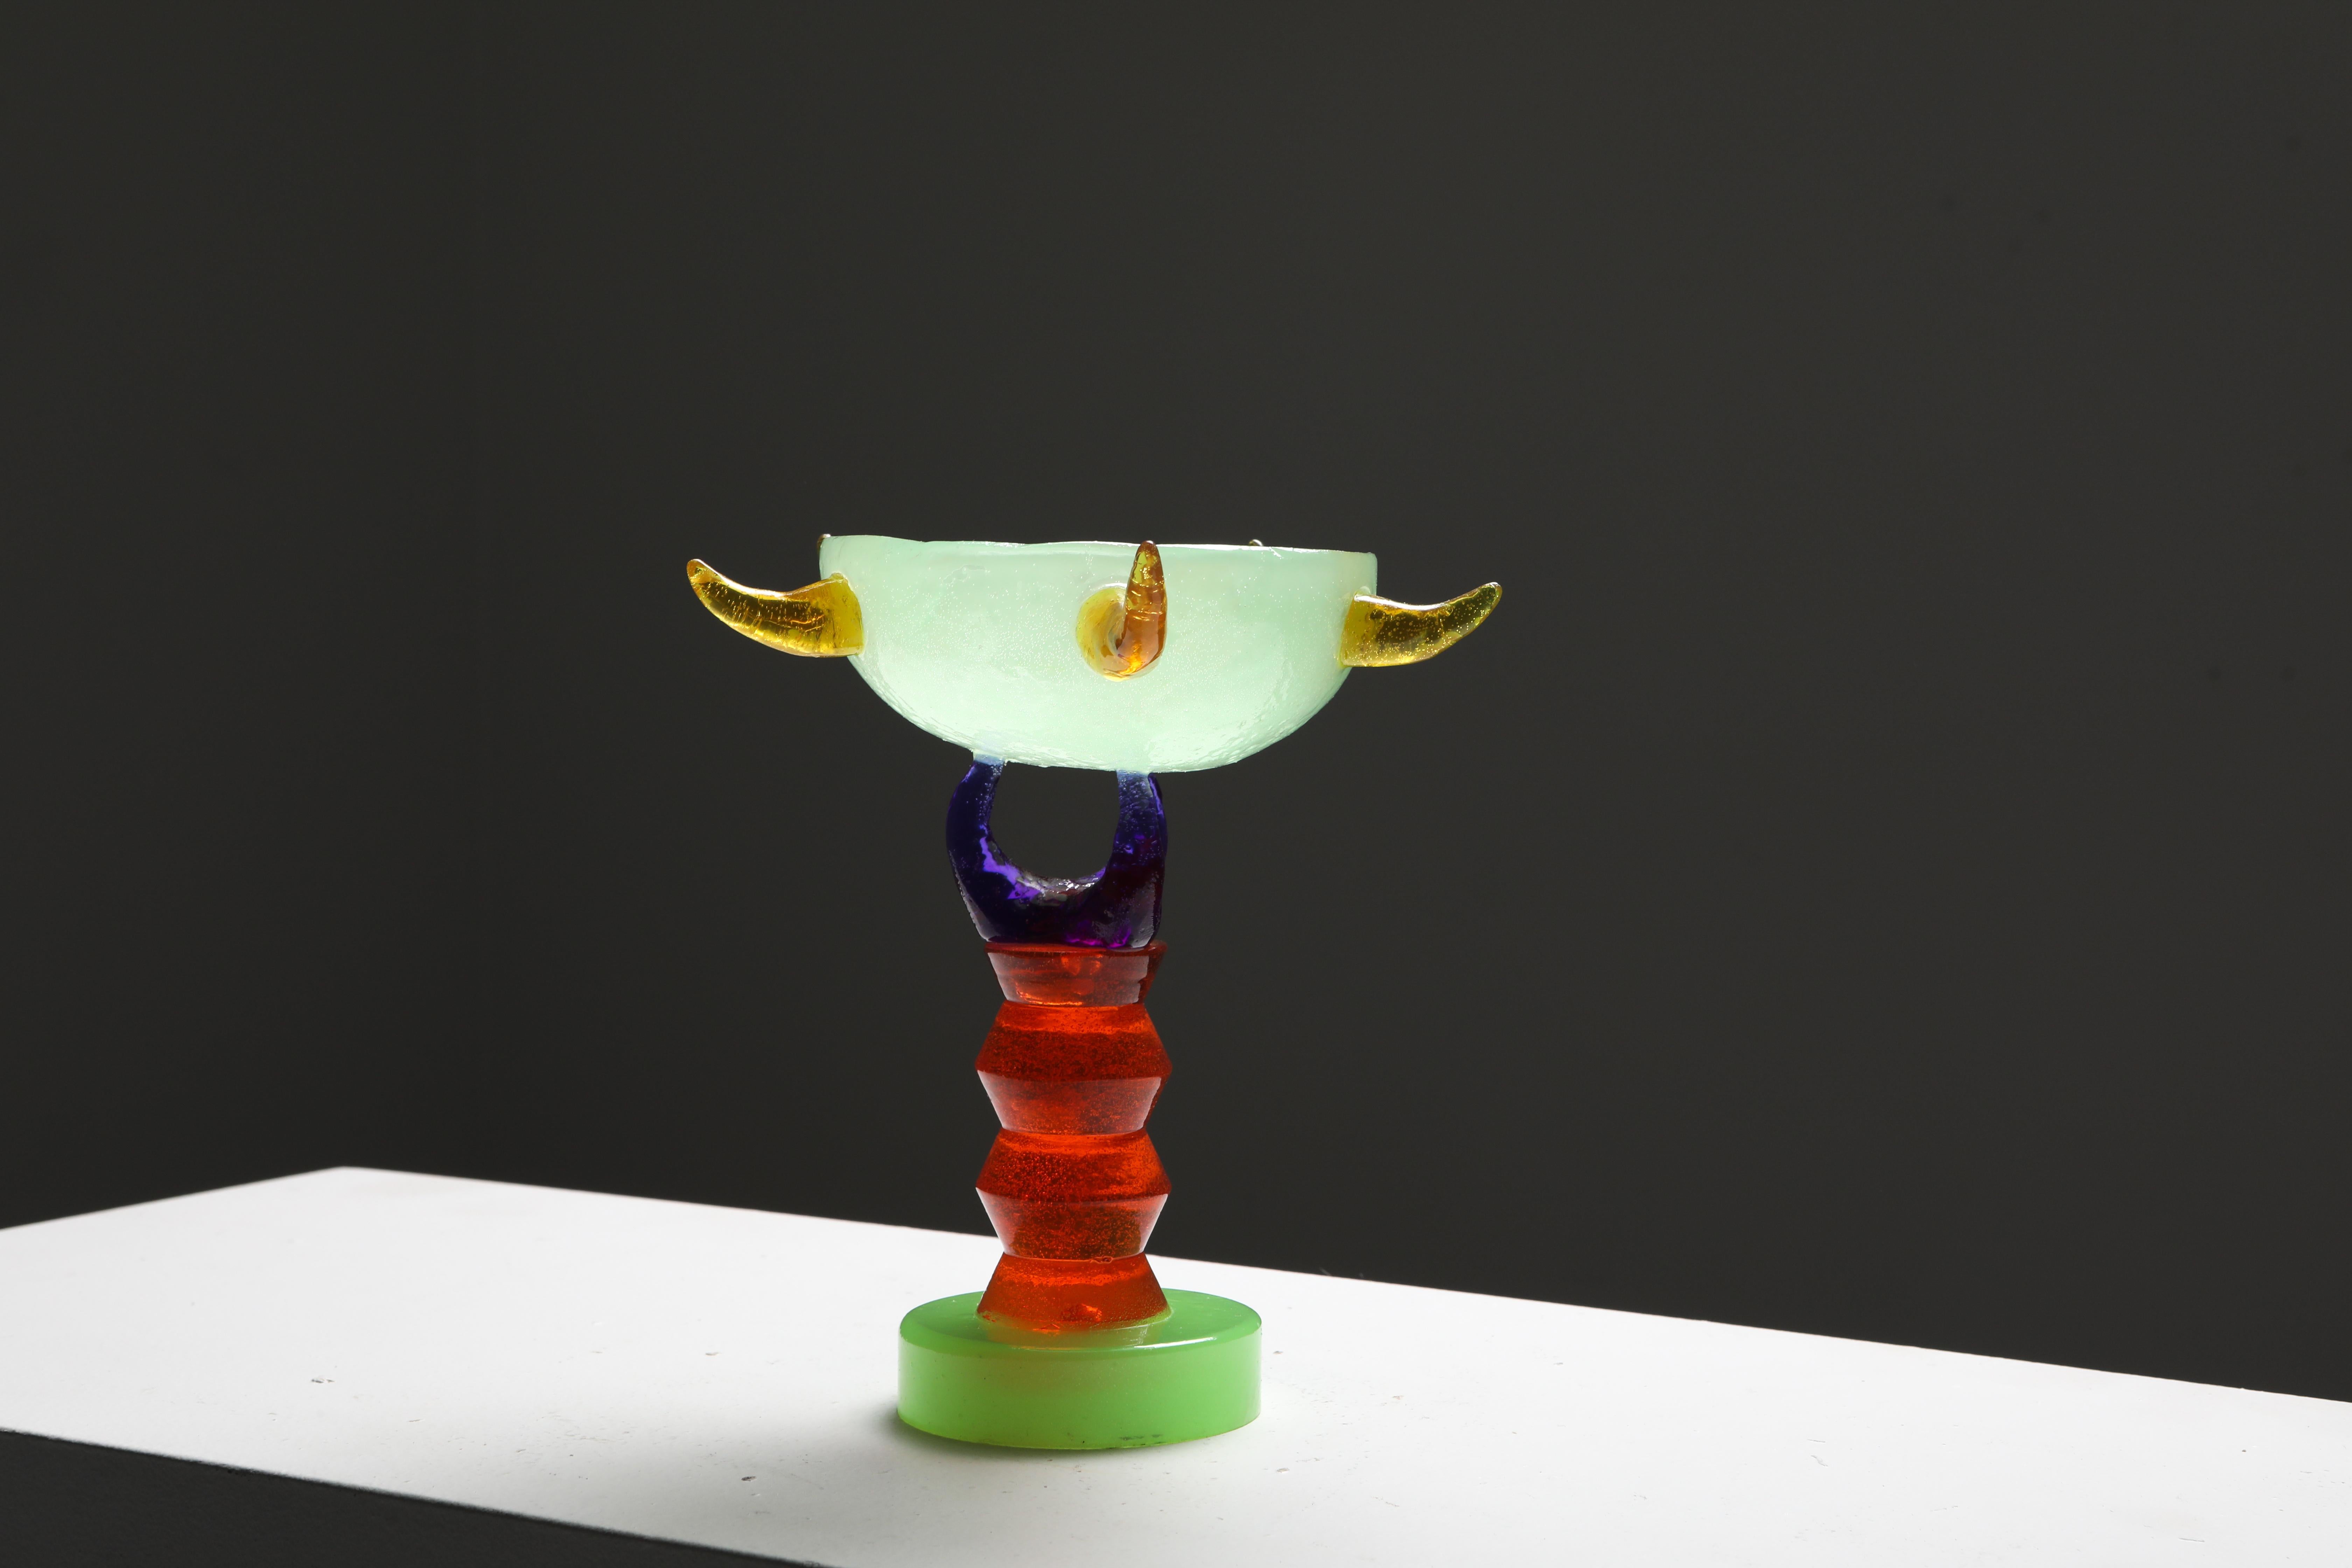 Contemporary glass sculpture, Boris De Beijer, 2019, The Netherlands.

Aerosilk World Cup III is a contemporary functional art object created by Boris Beijer. The one -of a kind item was part of the exhibition booth of Everyday Gallery at ART